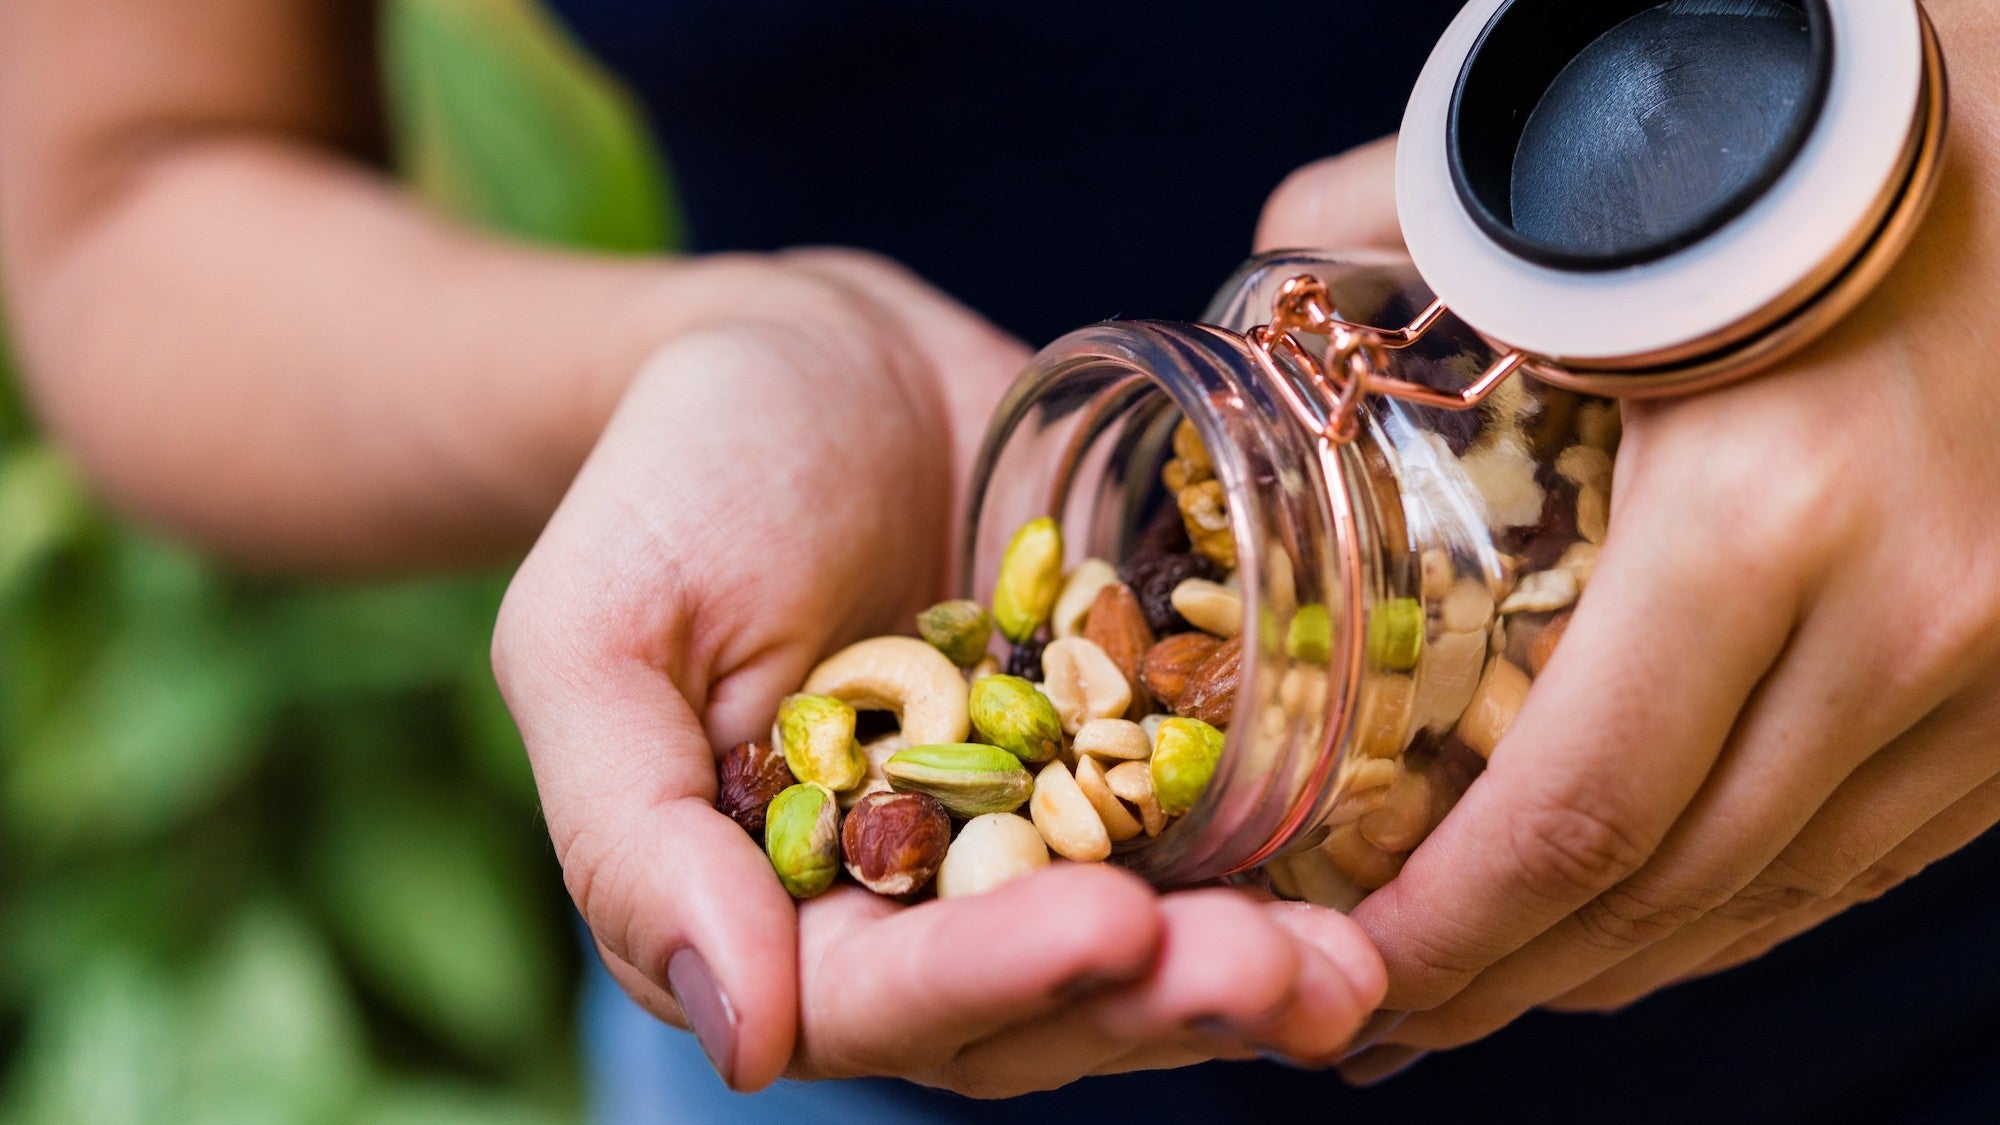 Healthy Snack: Trail Mix with Nuts